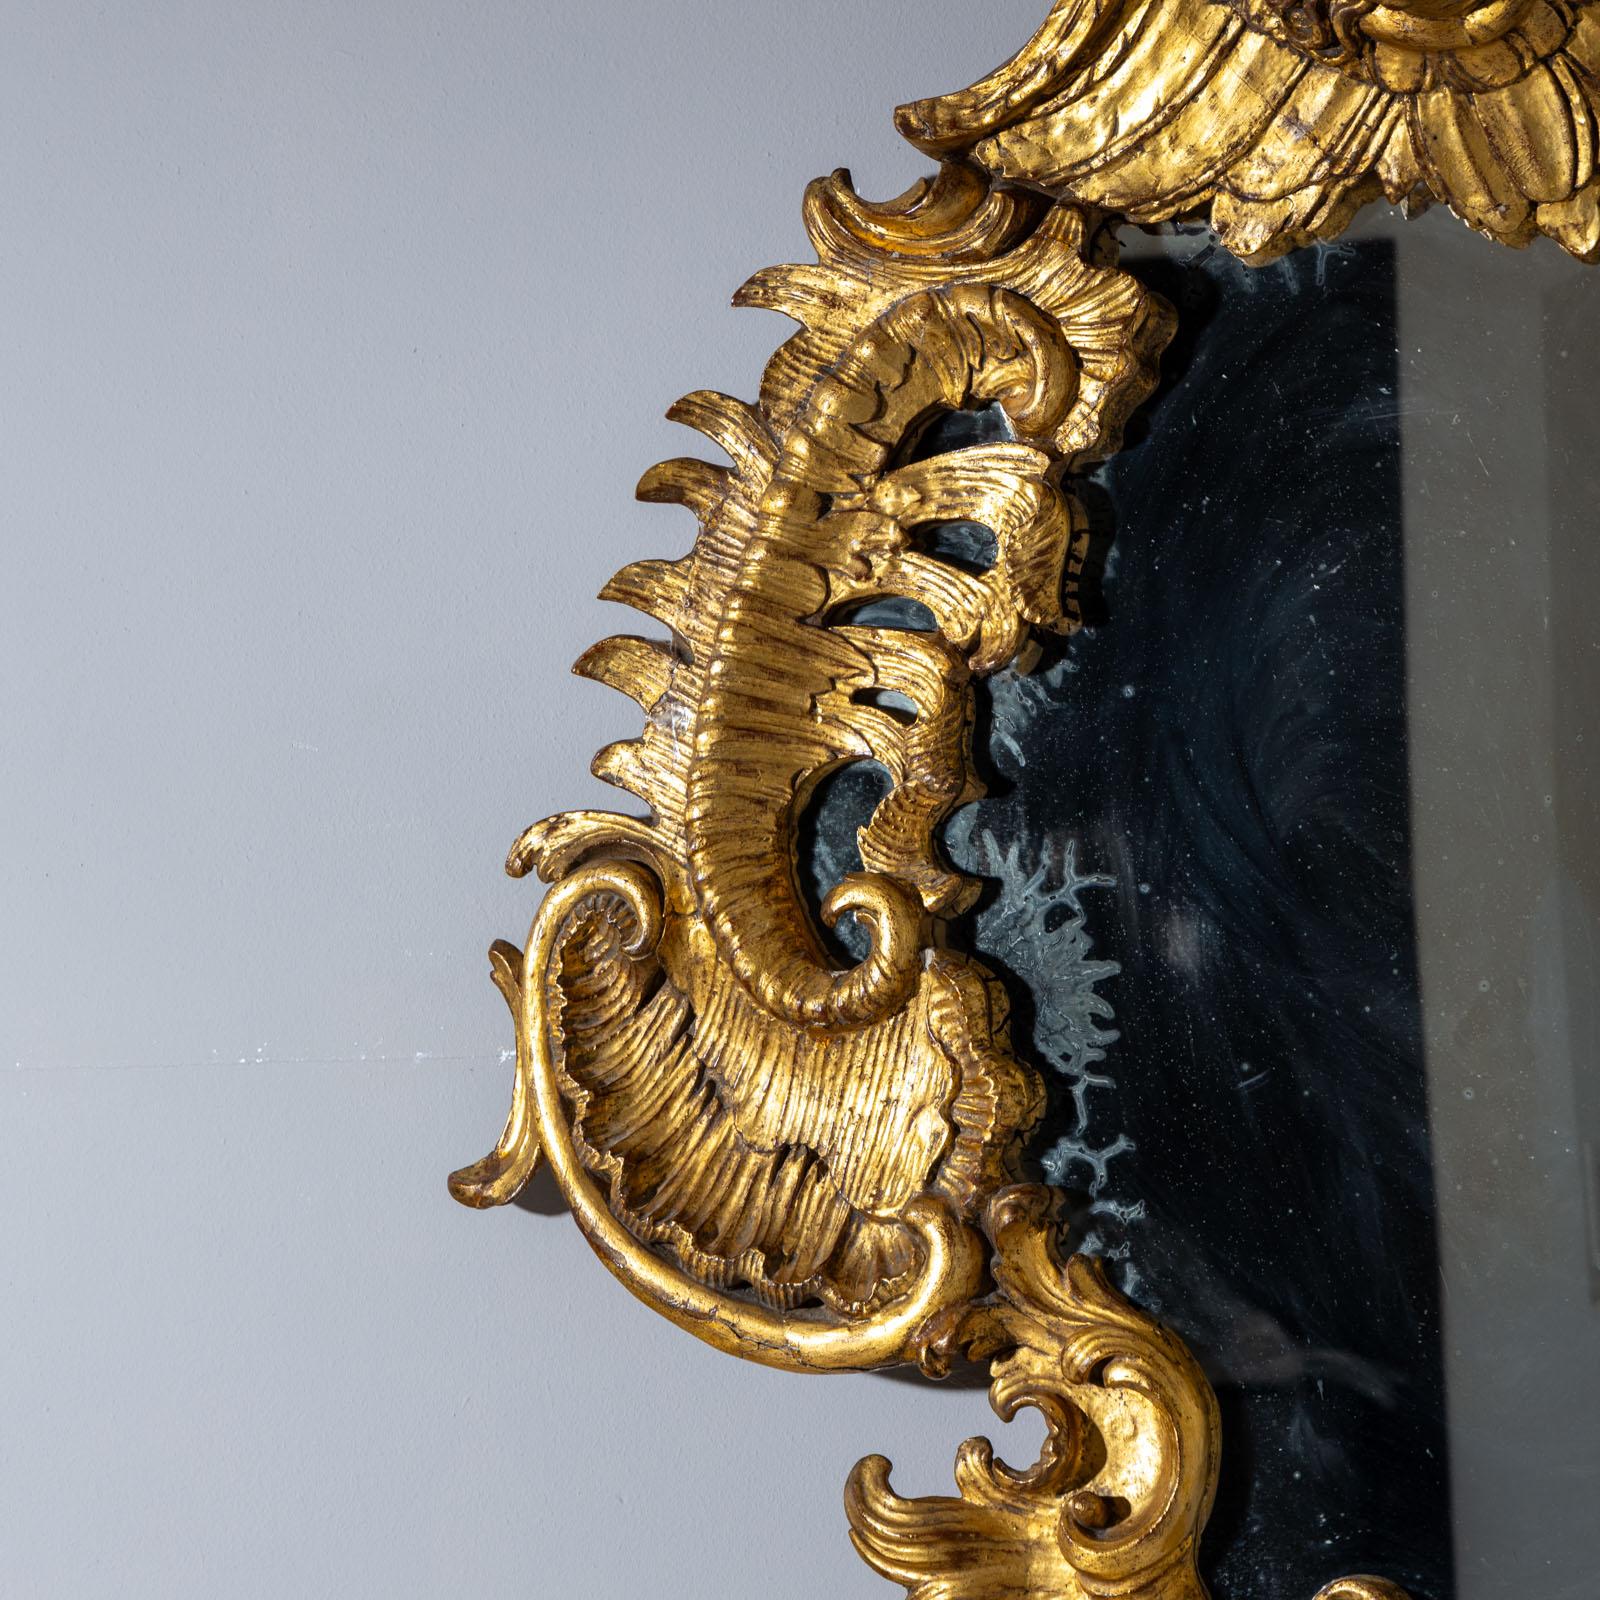 Large Rococo wall mirror in a gold-patinated, curved frame with rocailles and shell ornaments as well as a winged putto head as a crown. Red wax seal on the reverse of the Prince Salm-Kyrburg (illegible): “Hoch. Fürst Salm-Kyrburg  Marschall Amts